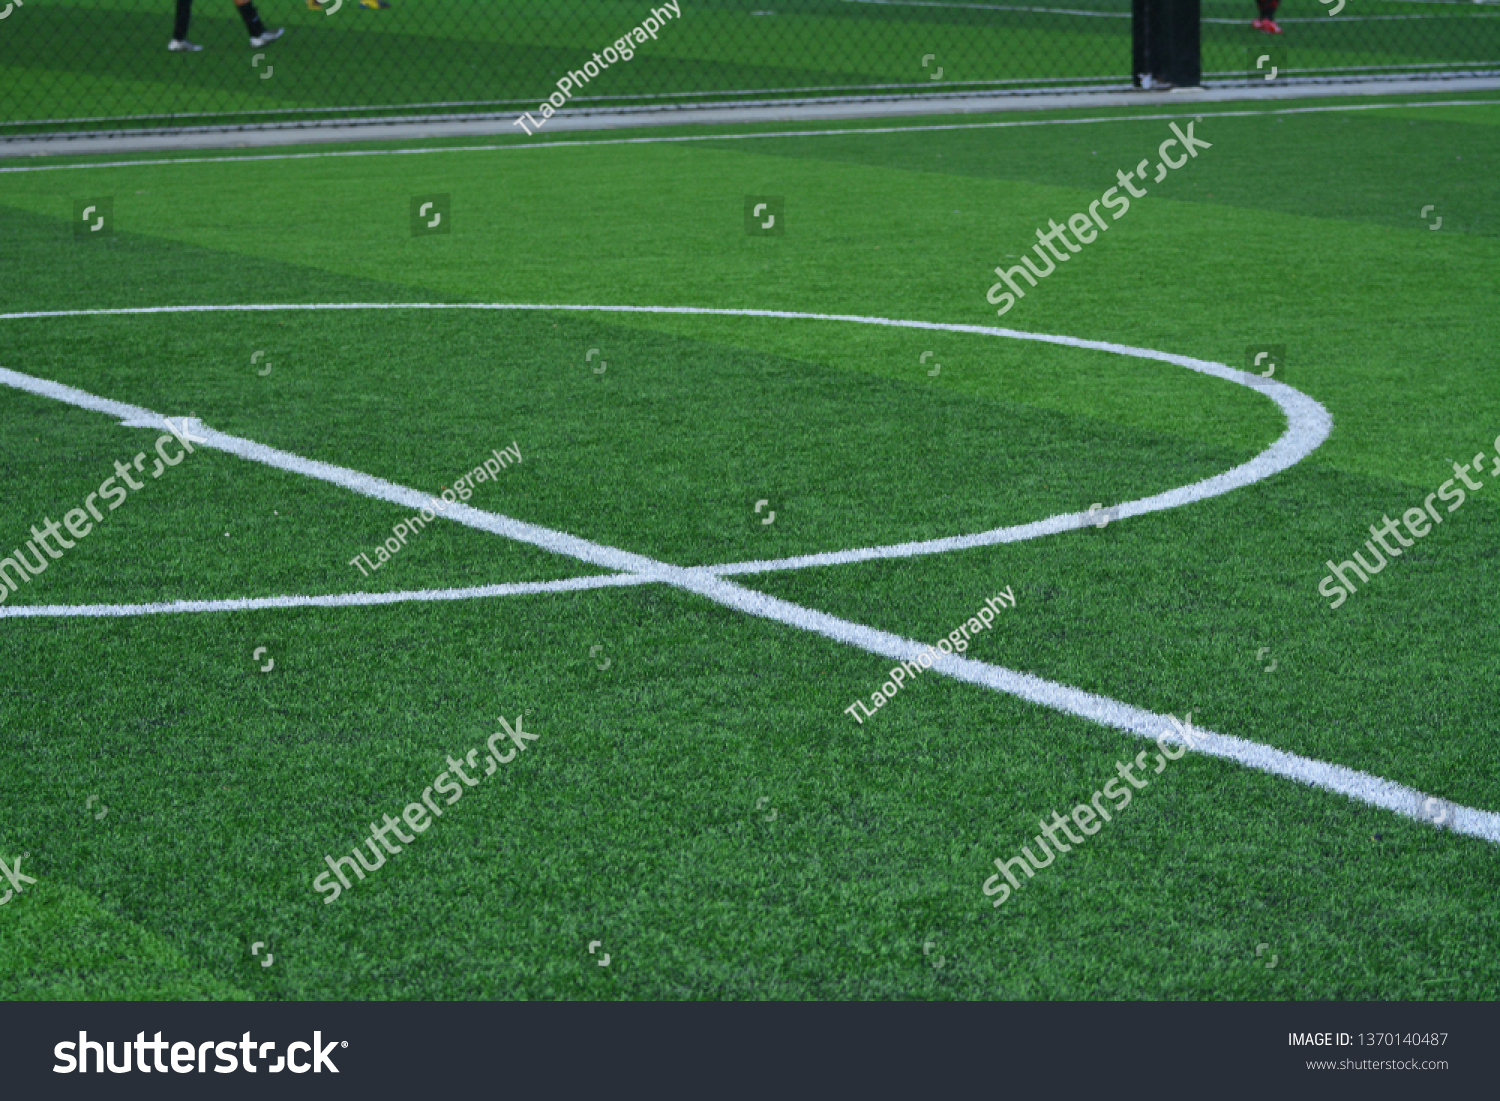 Stadium of football or soccer field with green grass. Sport indoor #1370140487